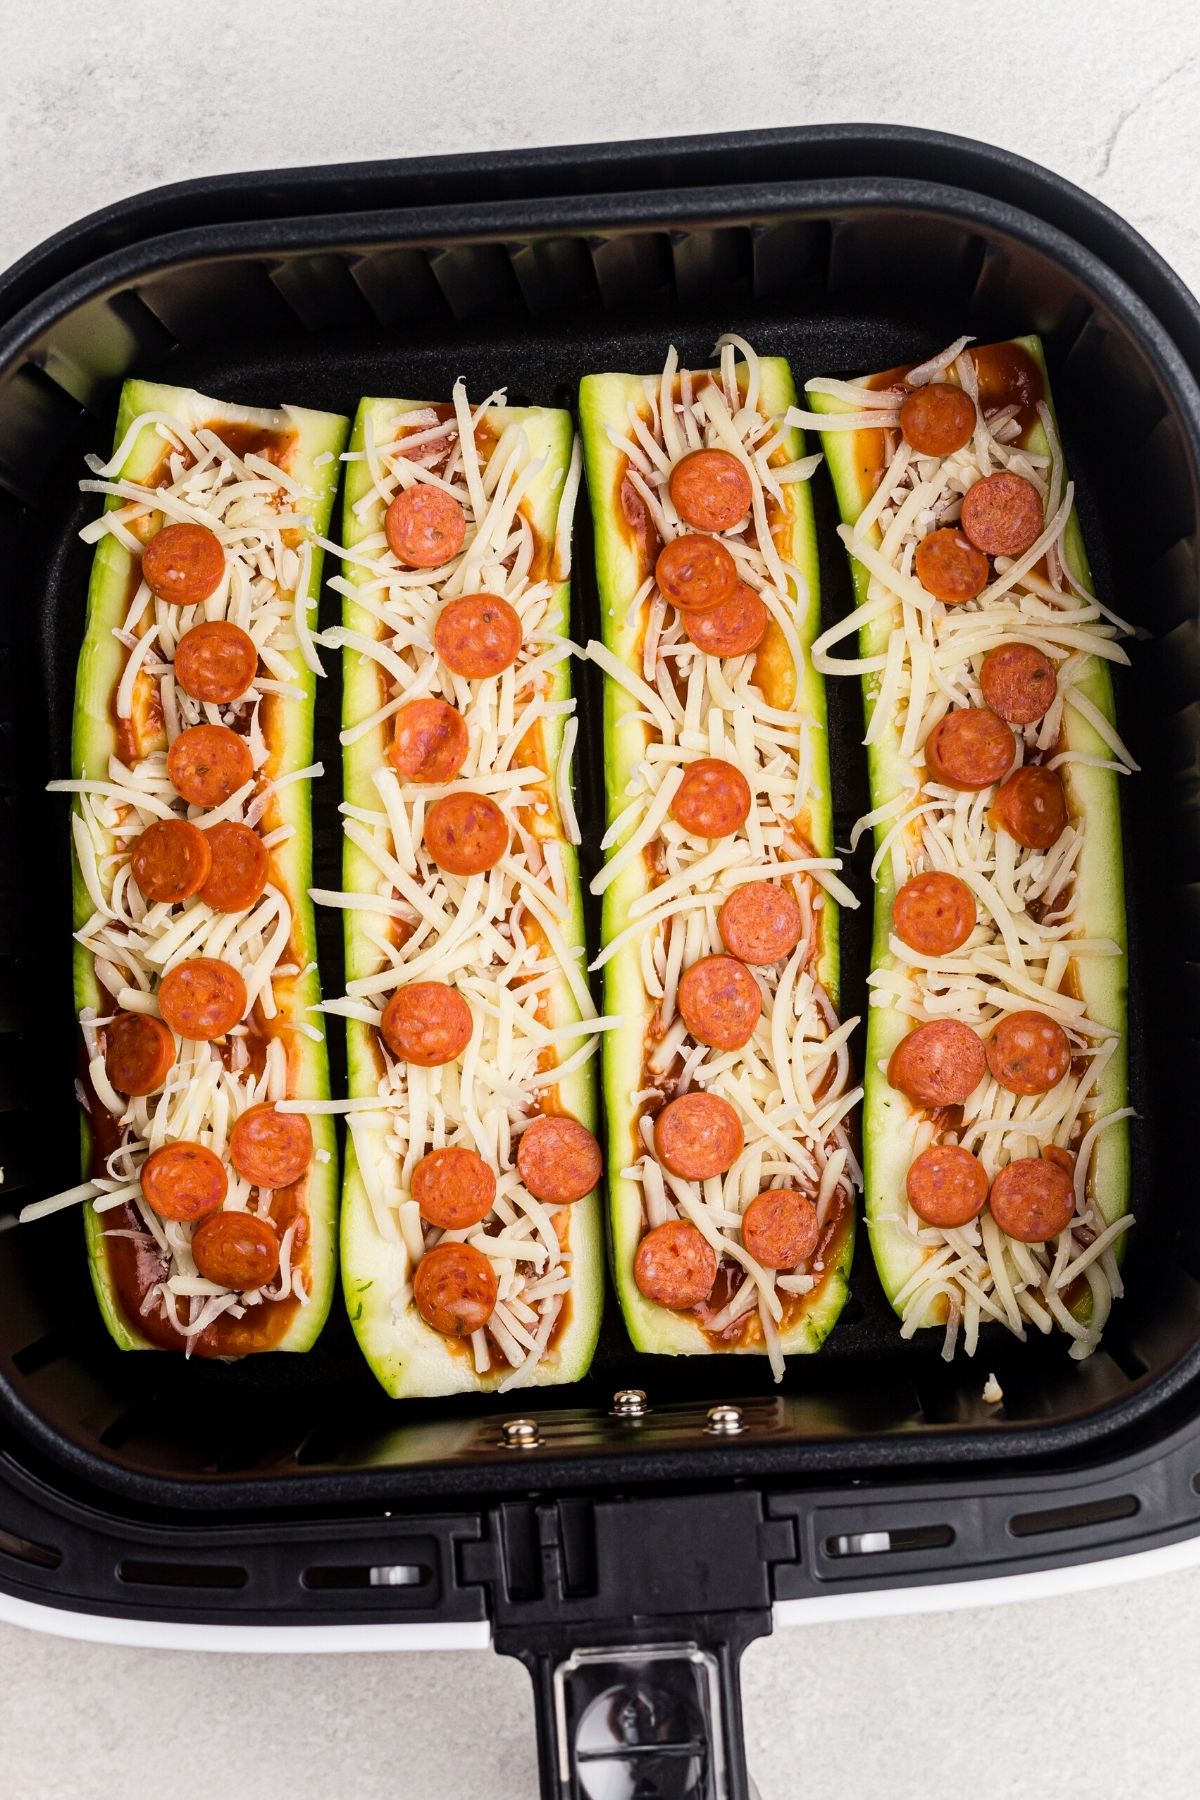 Sliced zucchini topped with sauce, cheese, and pepperoni before being cooked in the air fryer basket